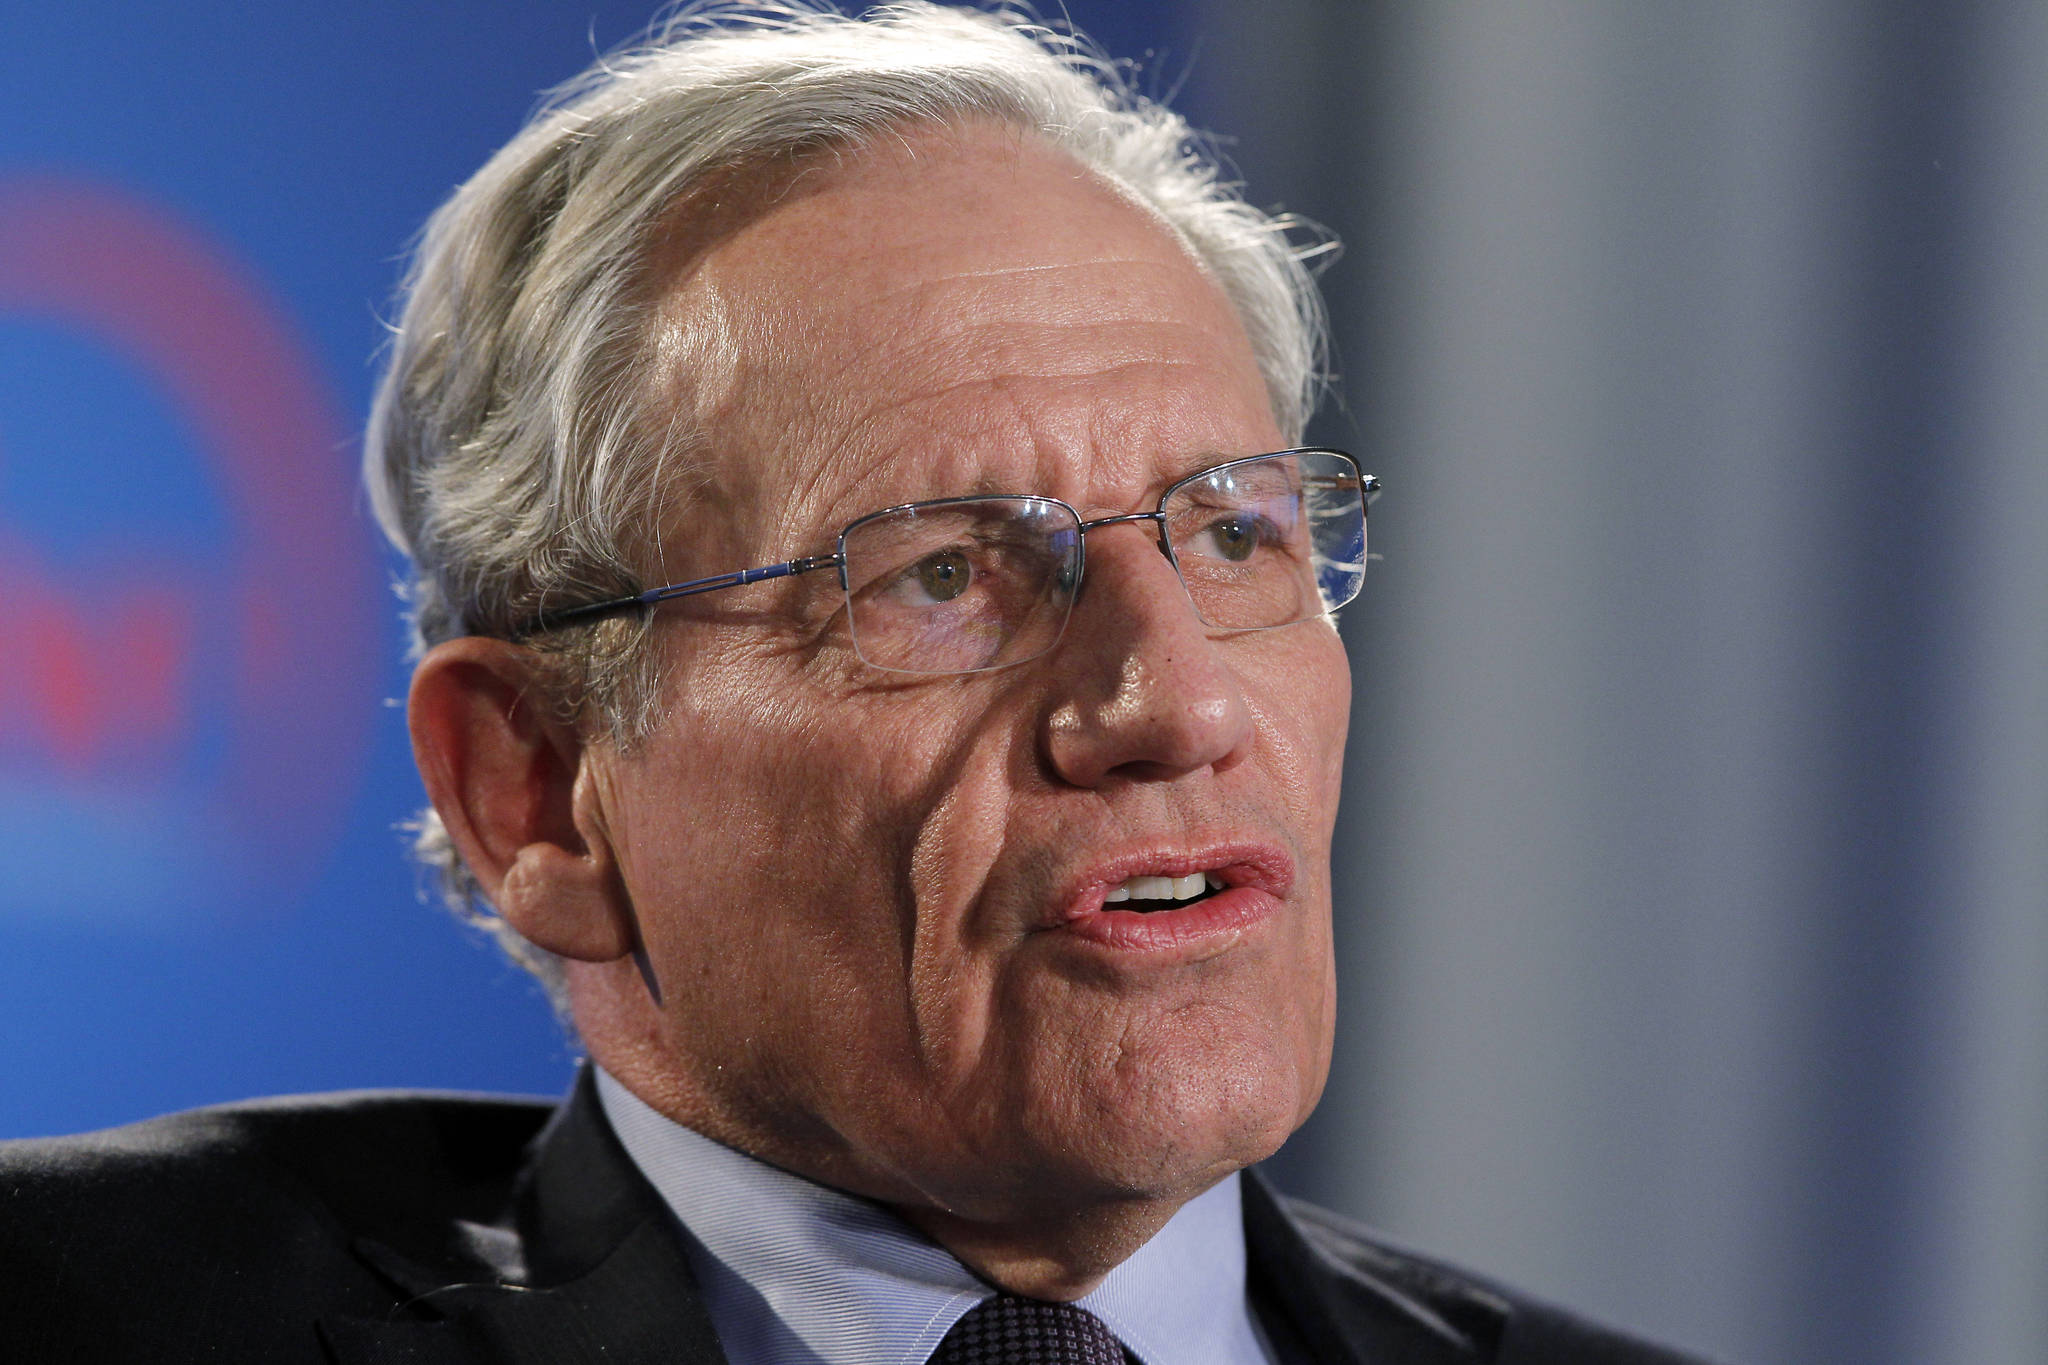 This June 11, 2012 photo shows former Washington Post reporter Bob Woodward speaking during an event to commemorate the 40th anniversary of Watergate in Washington. Details are starting to come out from journalist Bob Woodward’s forthcoming book on President Donald Trump’s first 18 months in office. (Alex Brandon | The Associated Press File)